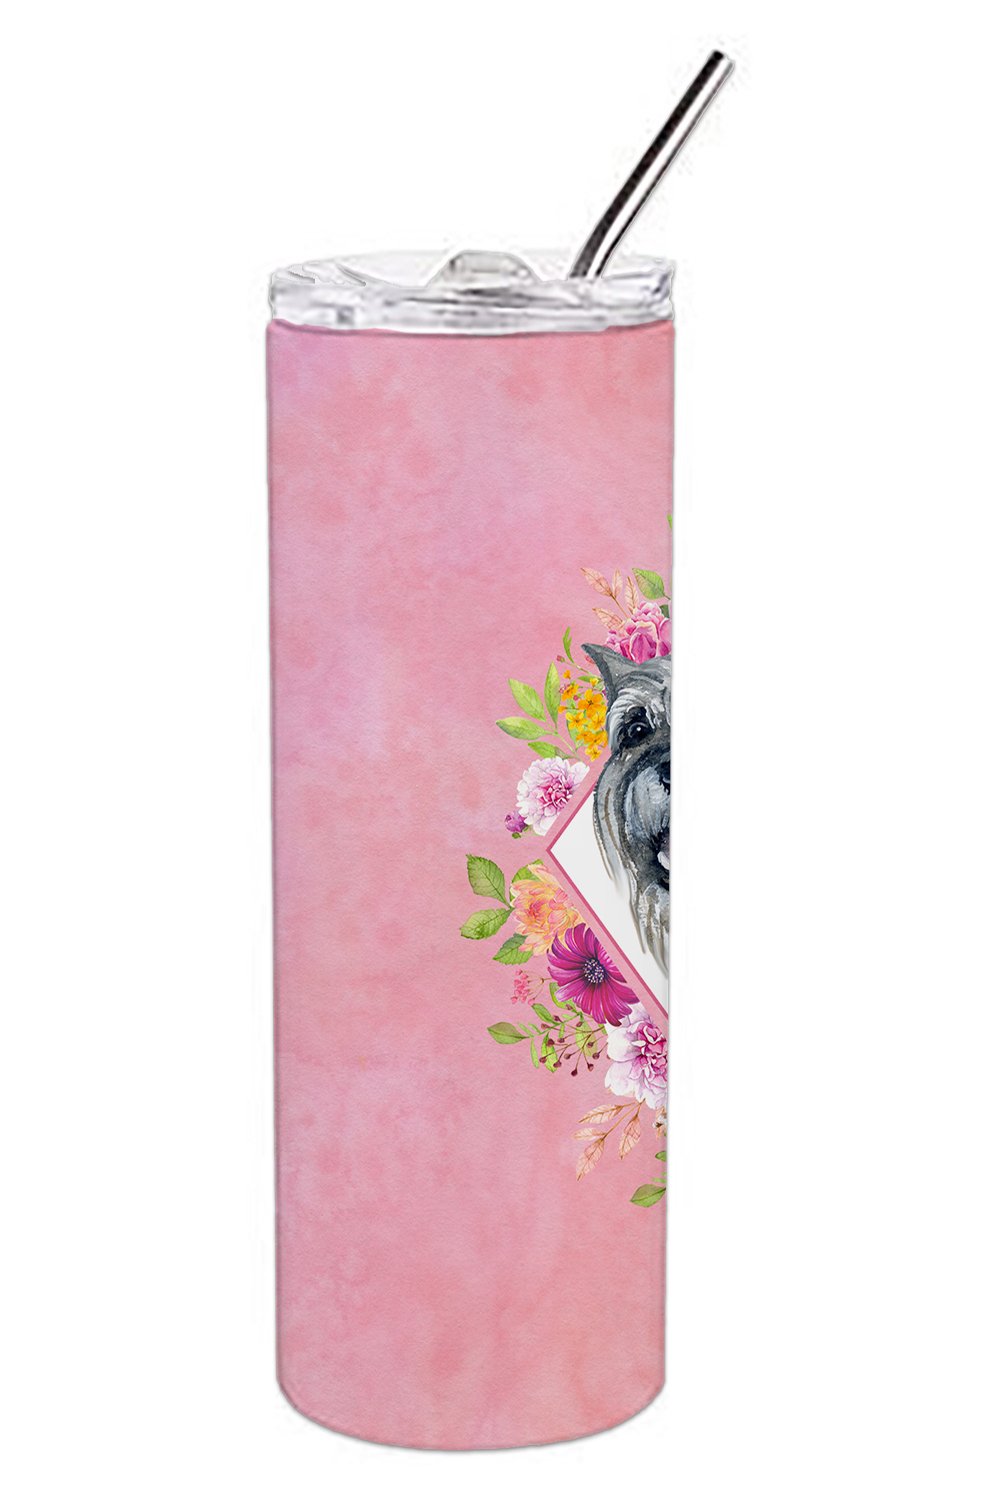 Schnauzer Pink Flowers Double Walled Stainless Steel 20 oz Skinny Tumbler CK4179TBL20 by Caroline's Treasures